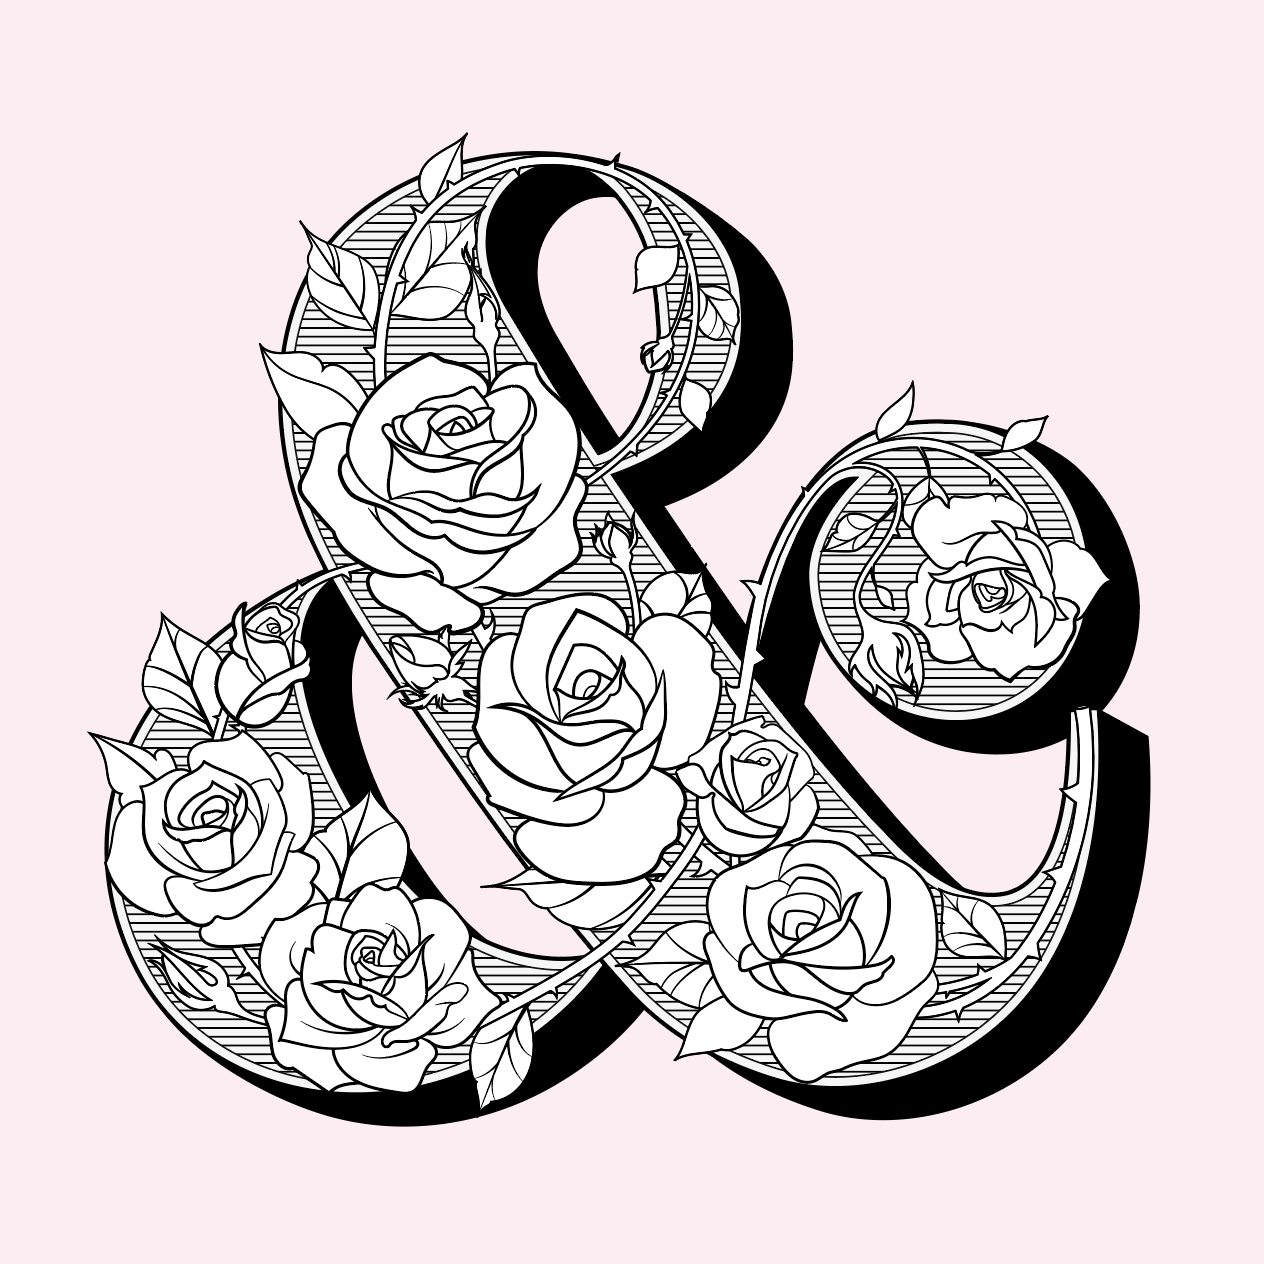 This image is of an ornate ampersand I created. There are rose vines covering the front surface.